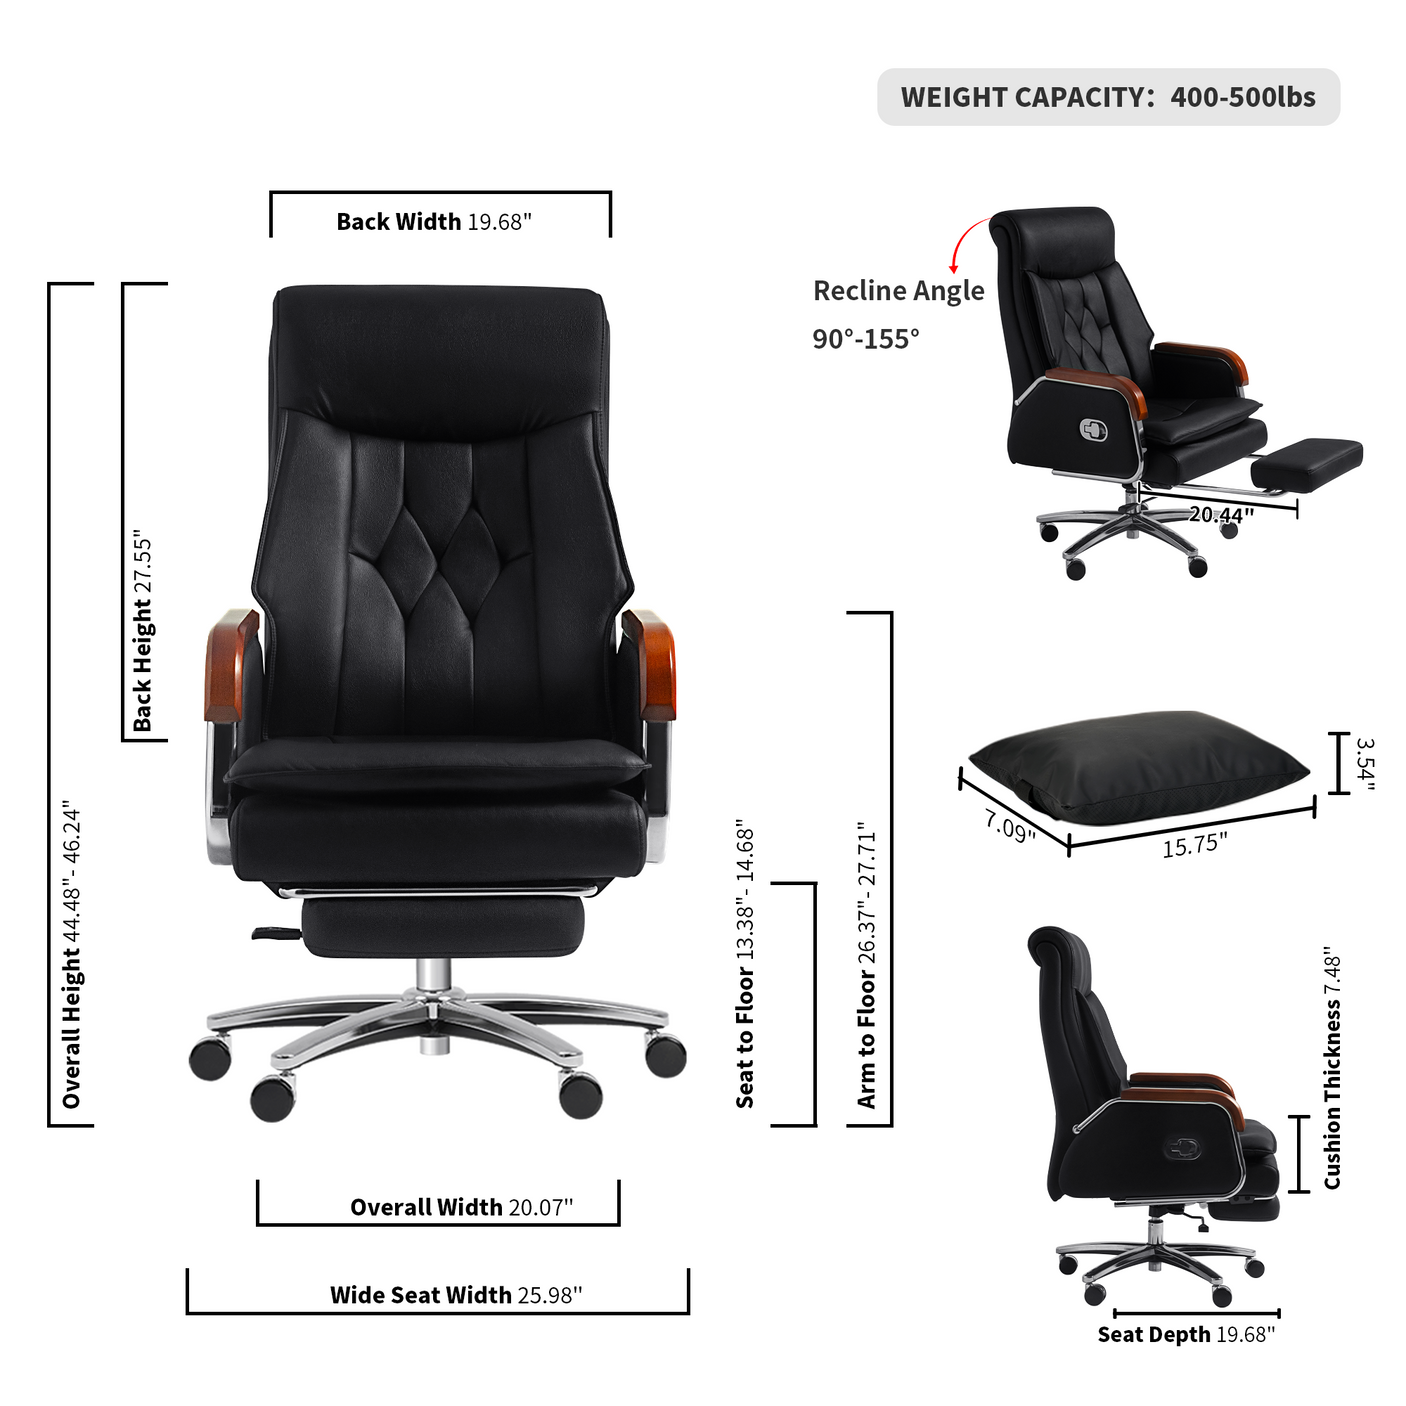 Cameron Massage Office Chair (Canada Only)